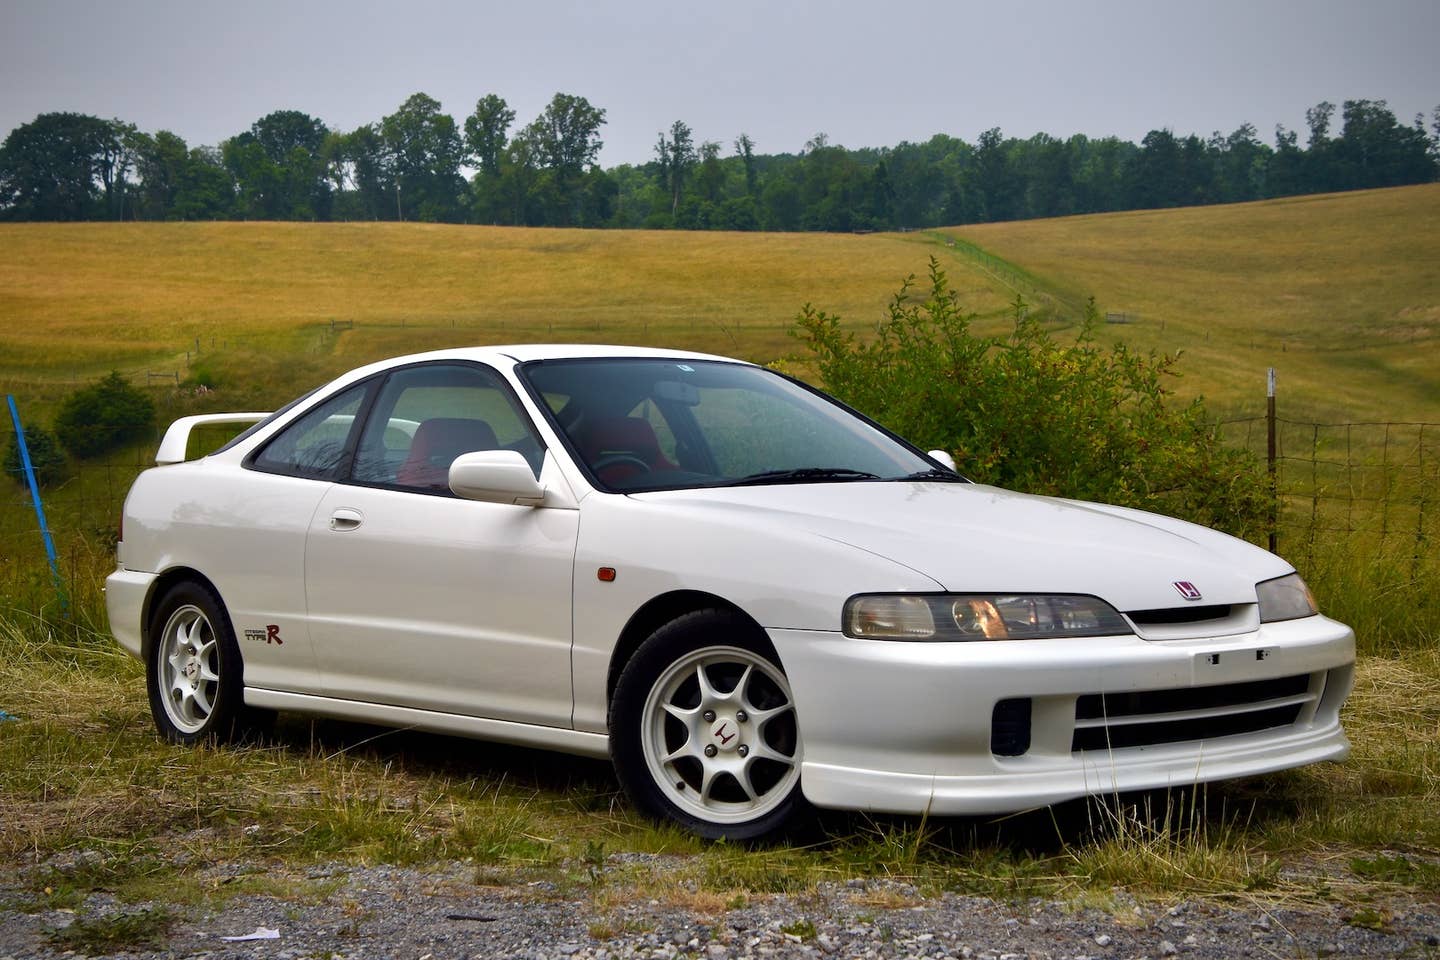 1996 Honda Integra Type R in front of a field